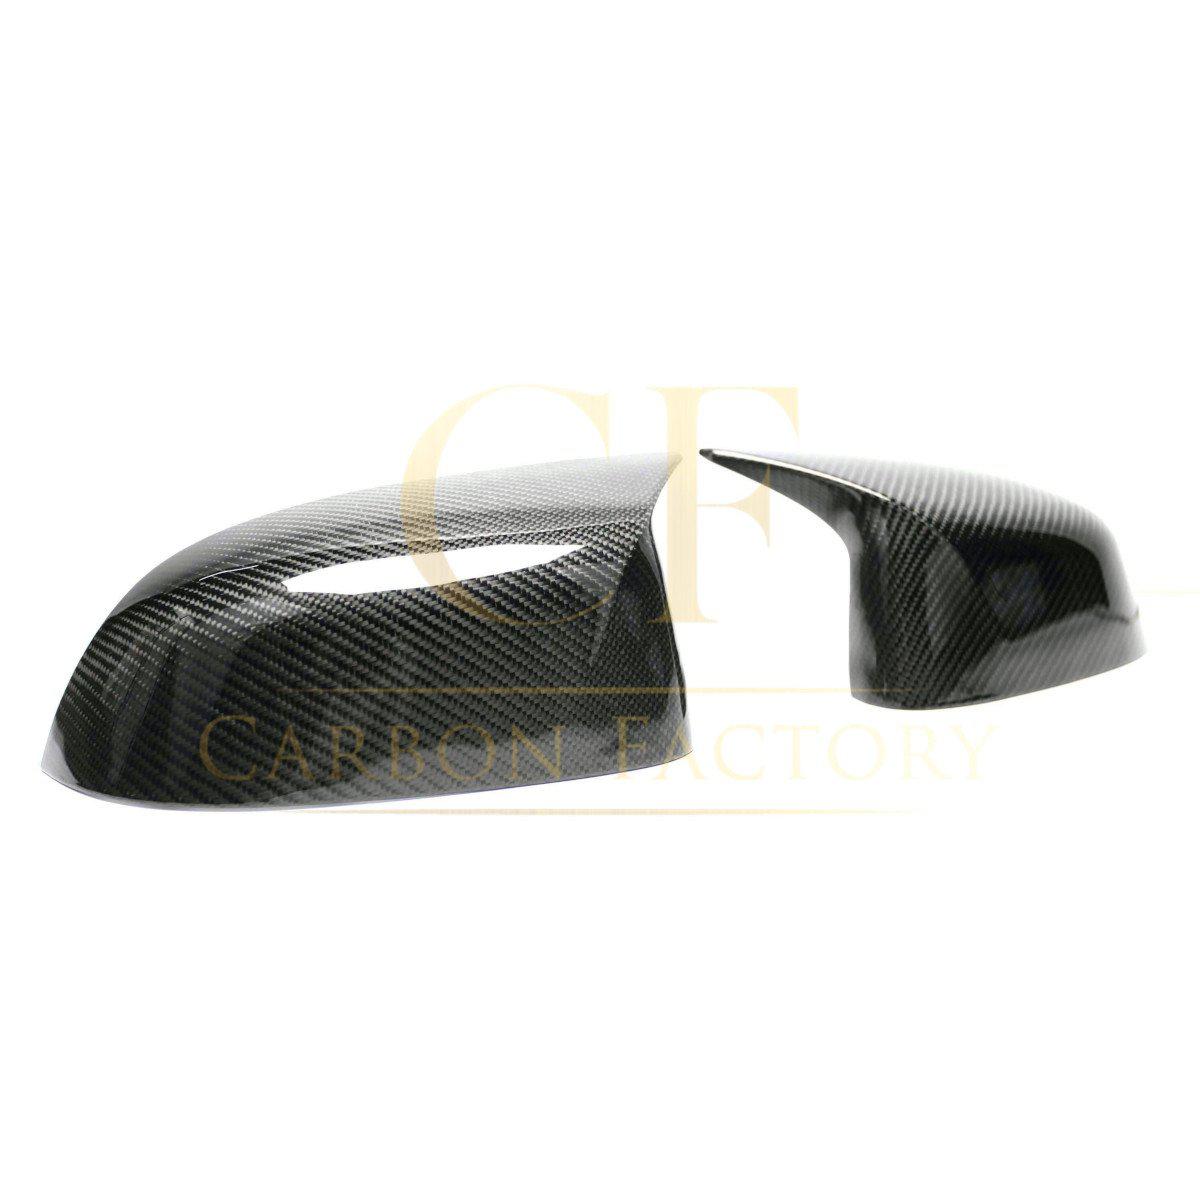 BMW G01 X3 G02 X4 G05 X5 G06 X6 G07 X7 M Performance Style Carbon Fibre Replacement Mirror Covers 18-25-Carbon Factory